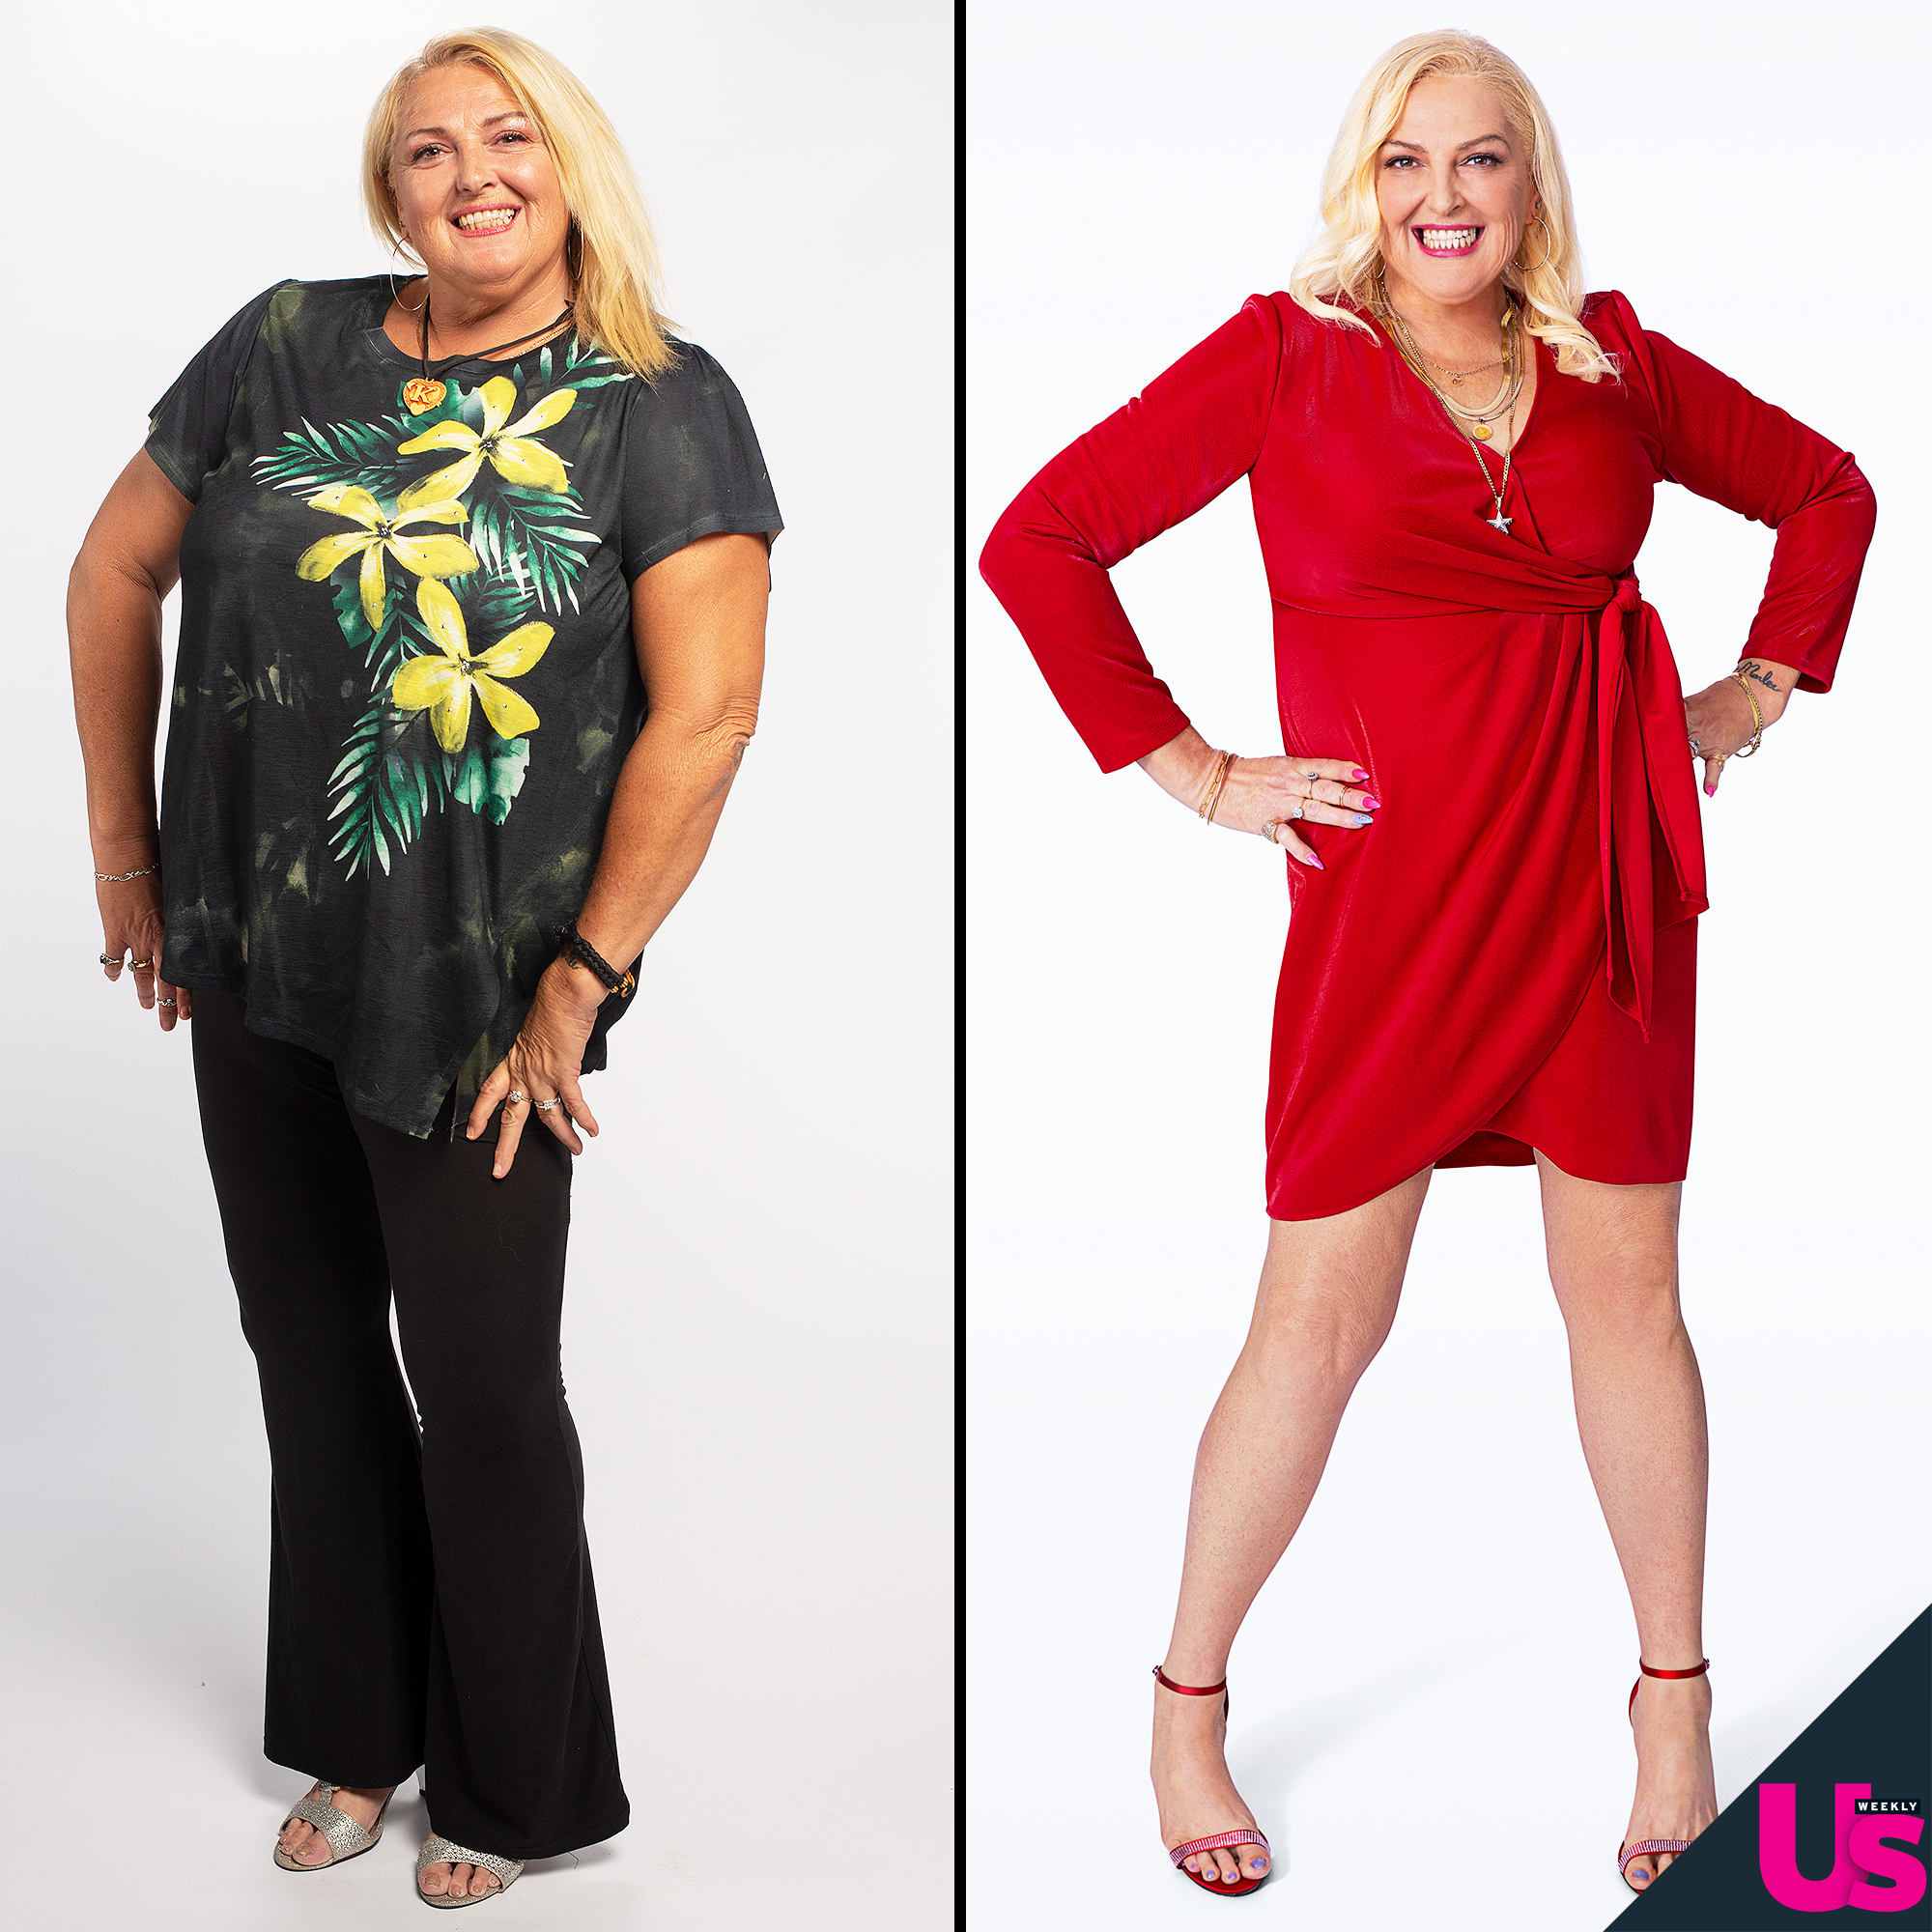 90 Day Fiance S Angela Drops 90 Lbs After Lipo Before After Pics